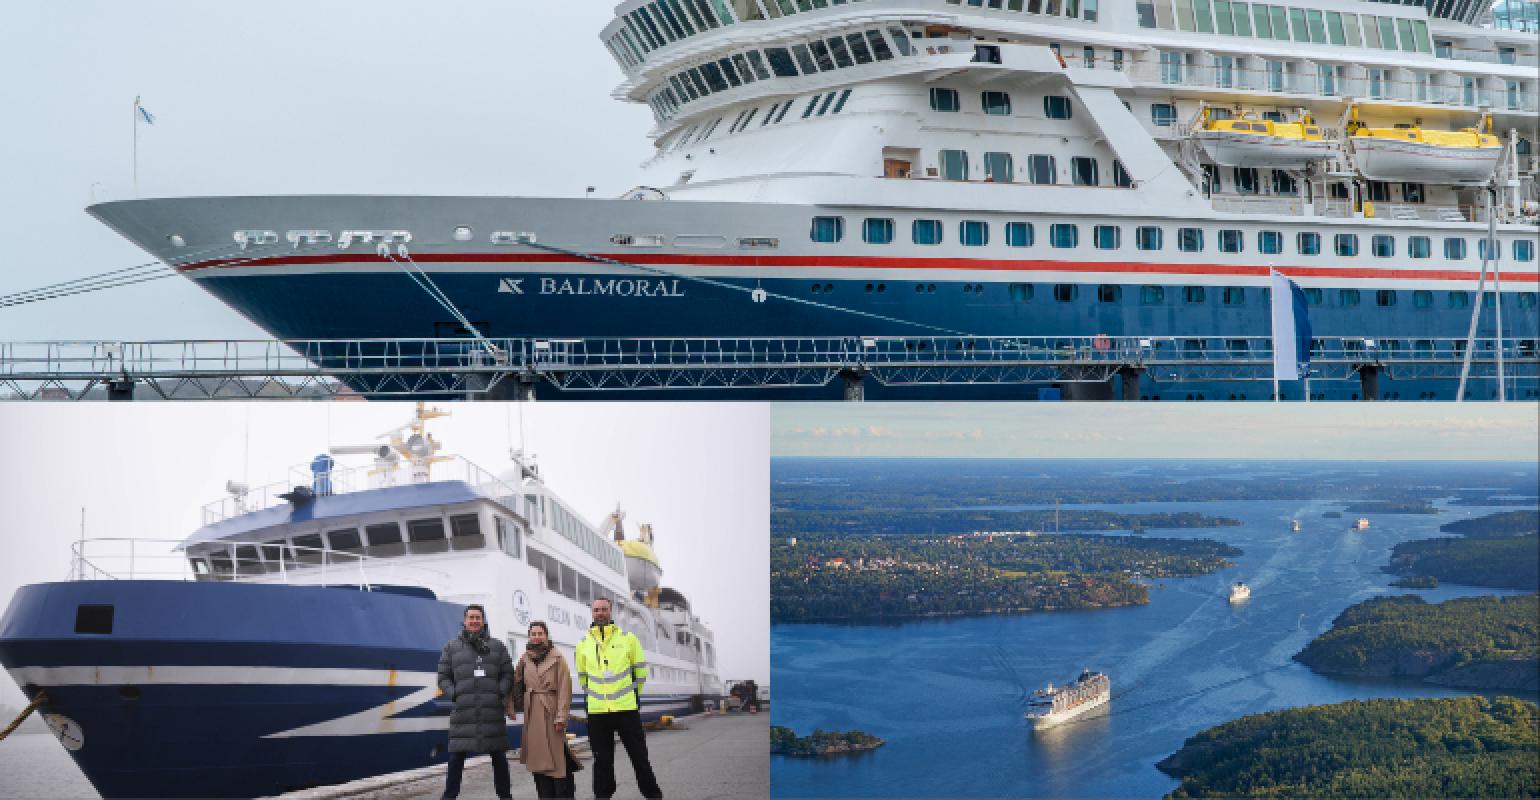 Spring has arrived in the Baltic region and cruise ships are back